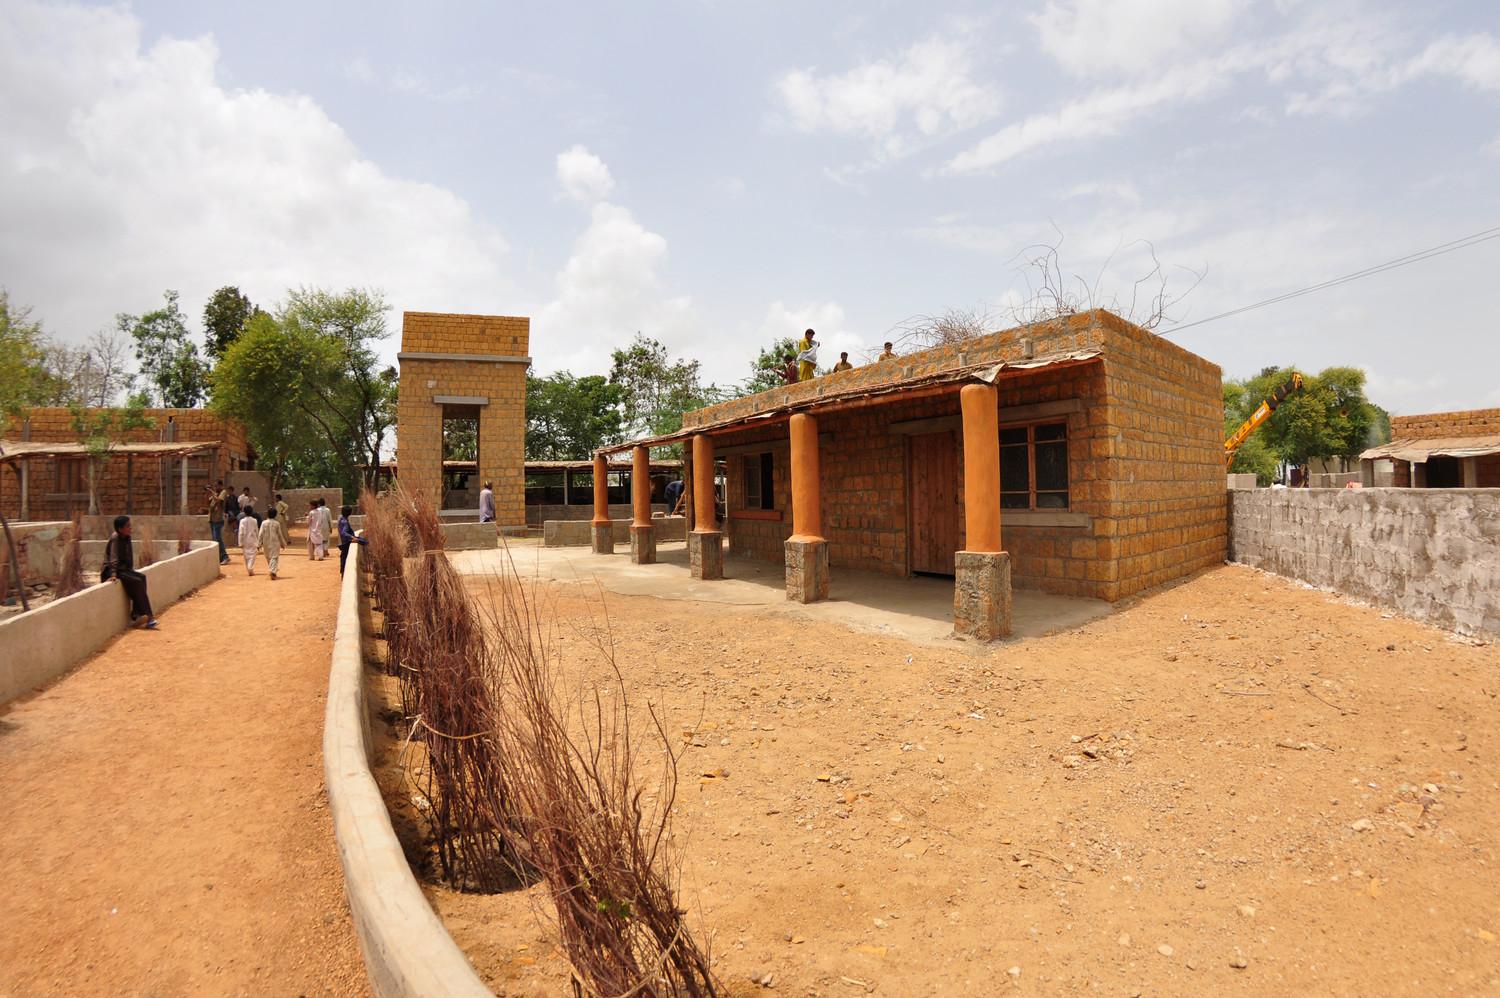 Village of Swaleh Jati during the reconstruction